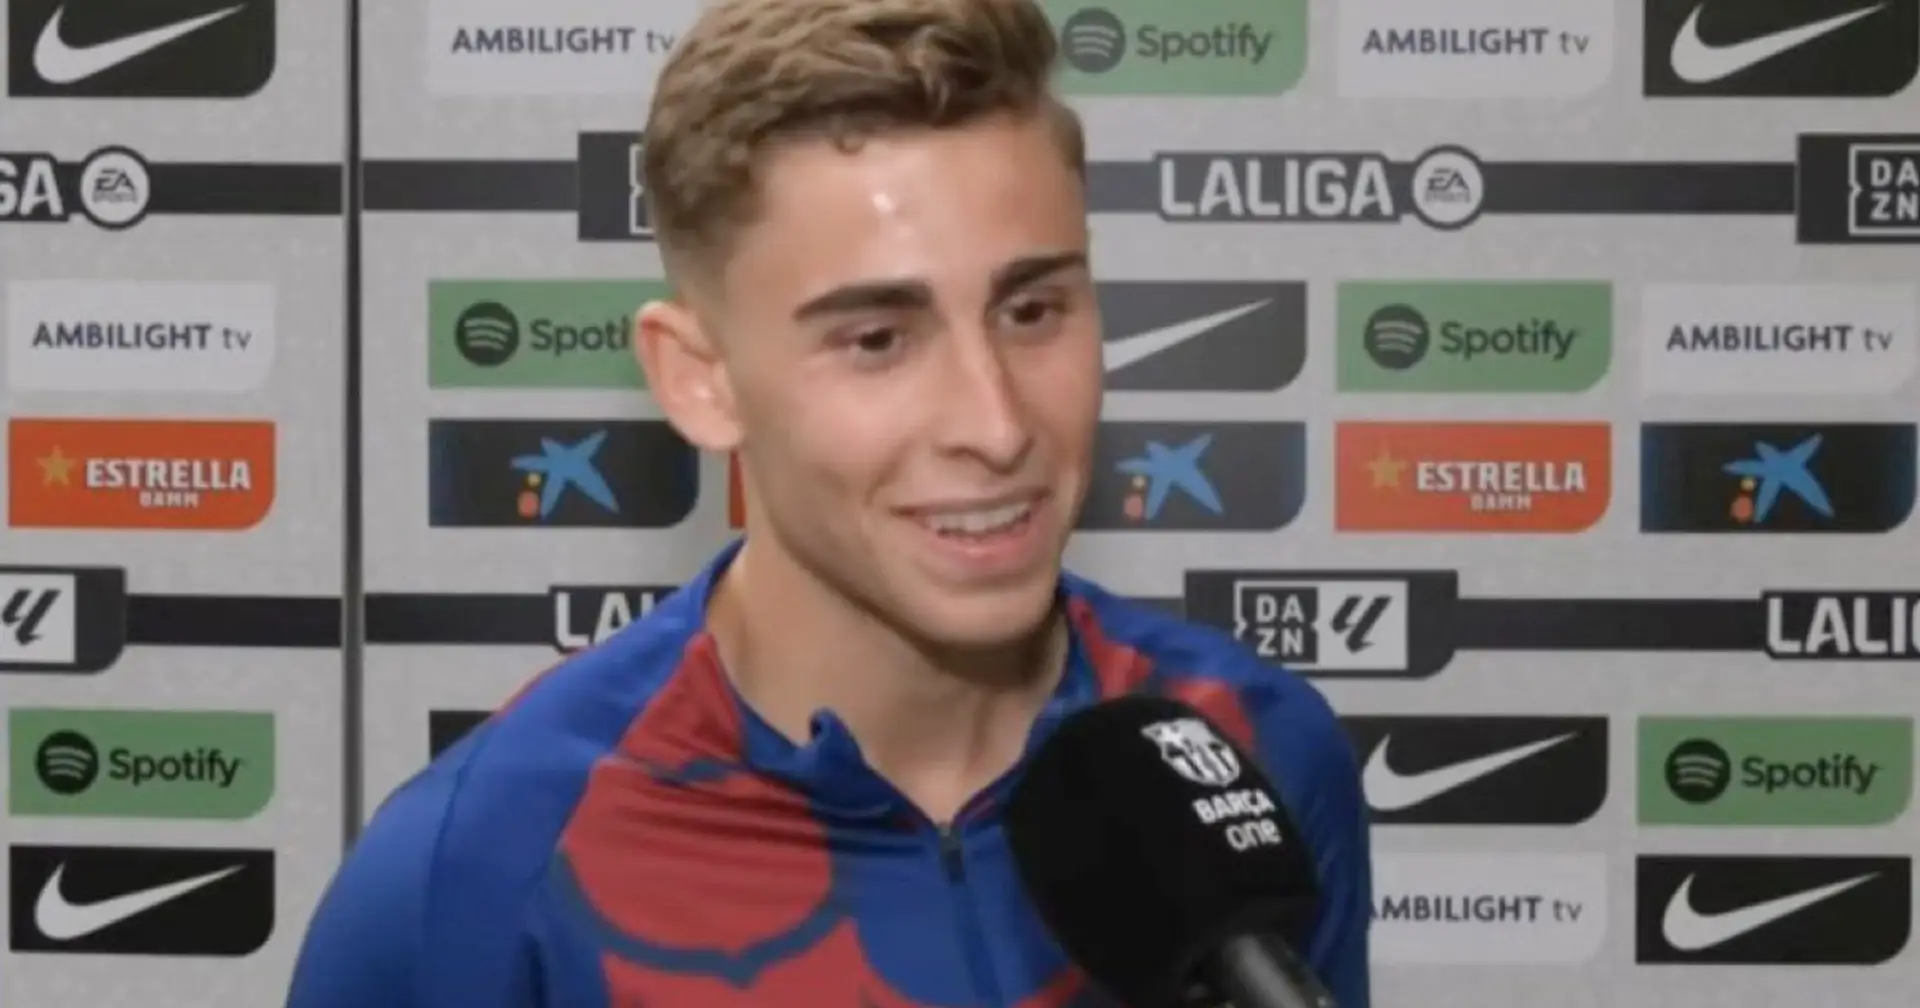 Fermin reacts to becoming Barca's highest-scoring midfielder this season